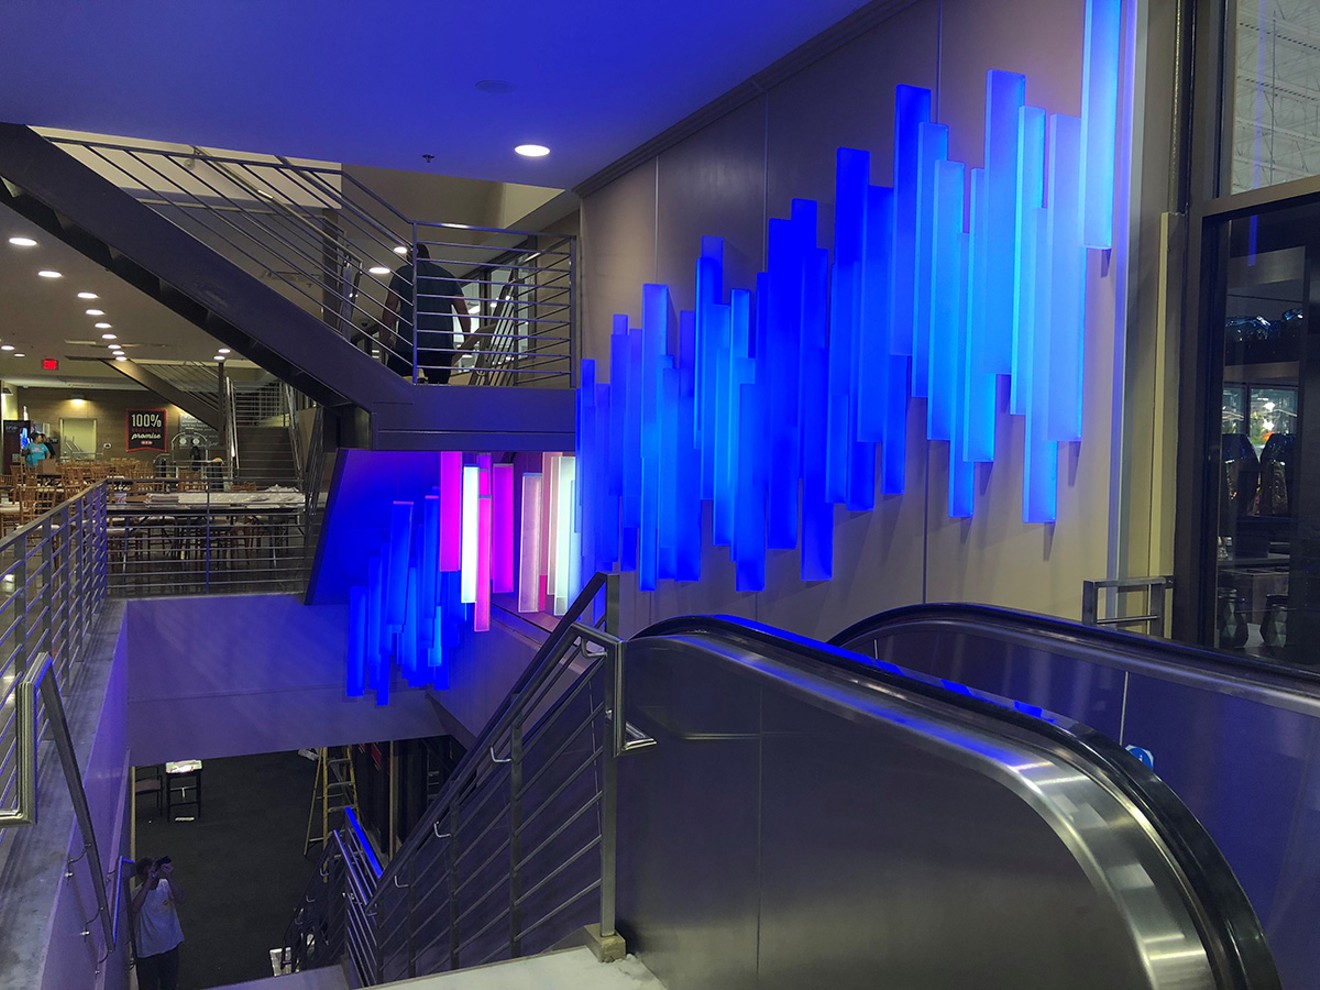 "Blue by You" by Ansen Seale is a permanent installation at the new multi-story H-E-B Bellaire Market at 5106 Bissonnet. As shoppers pass by on the upstairs level, walk down the stairs or go up the escalator, their movement causes the colors to change.